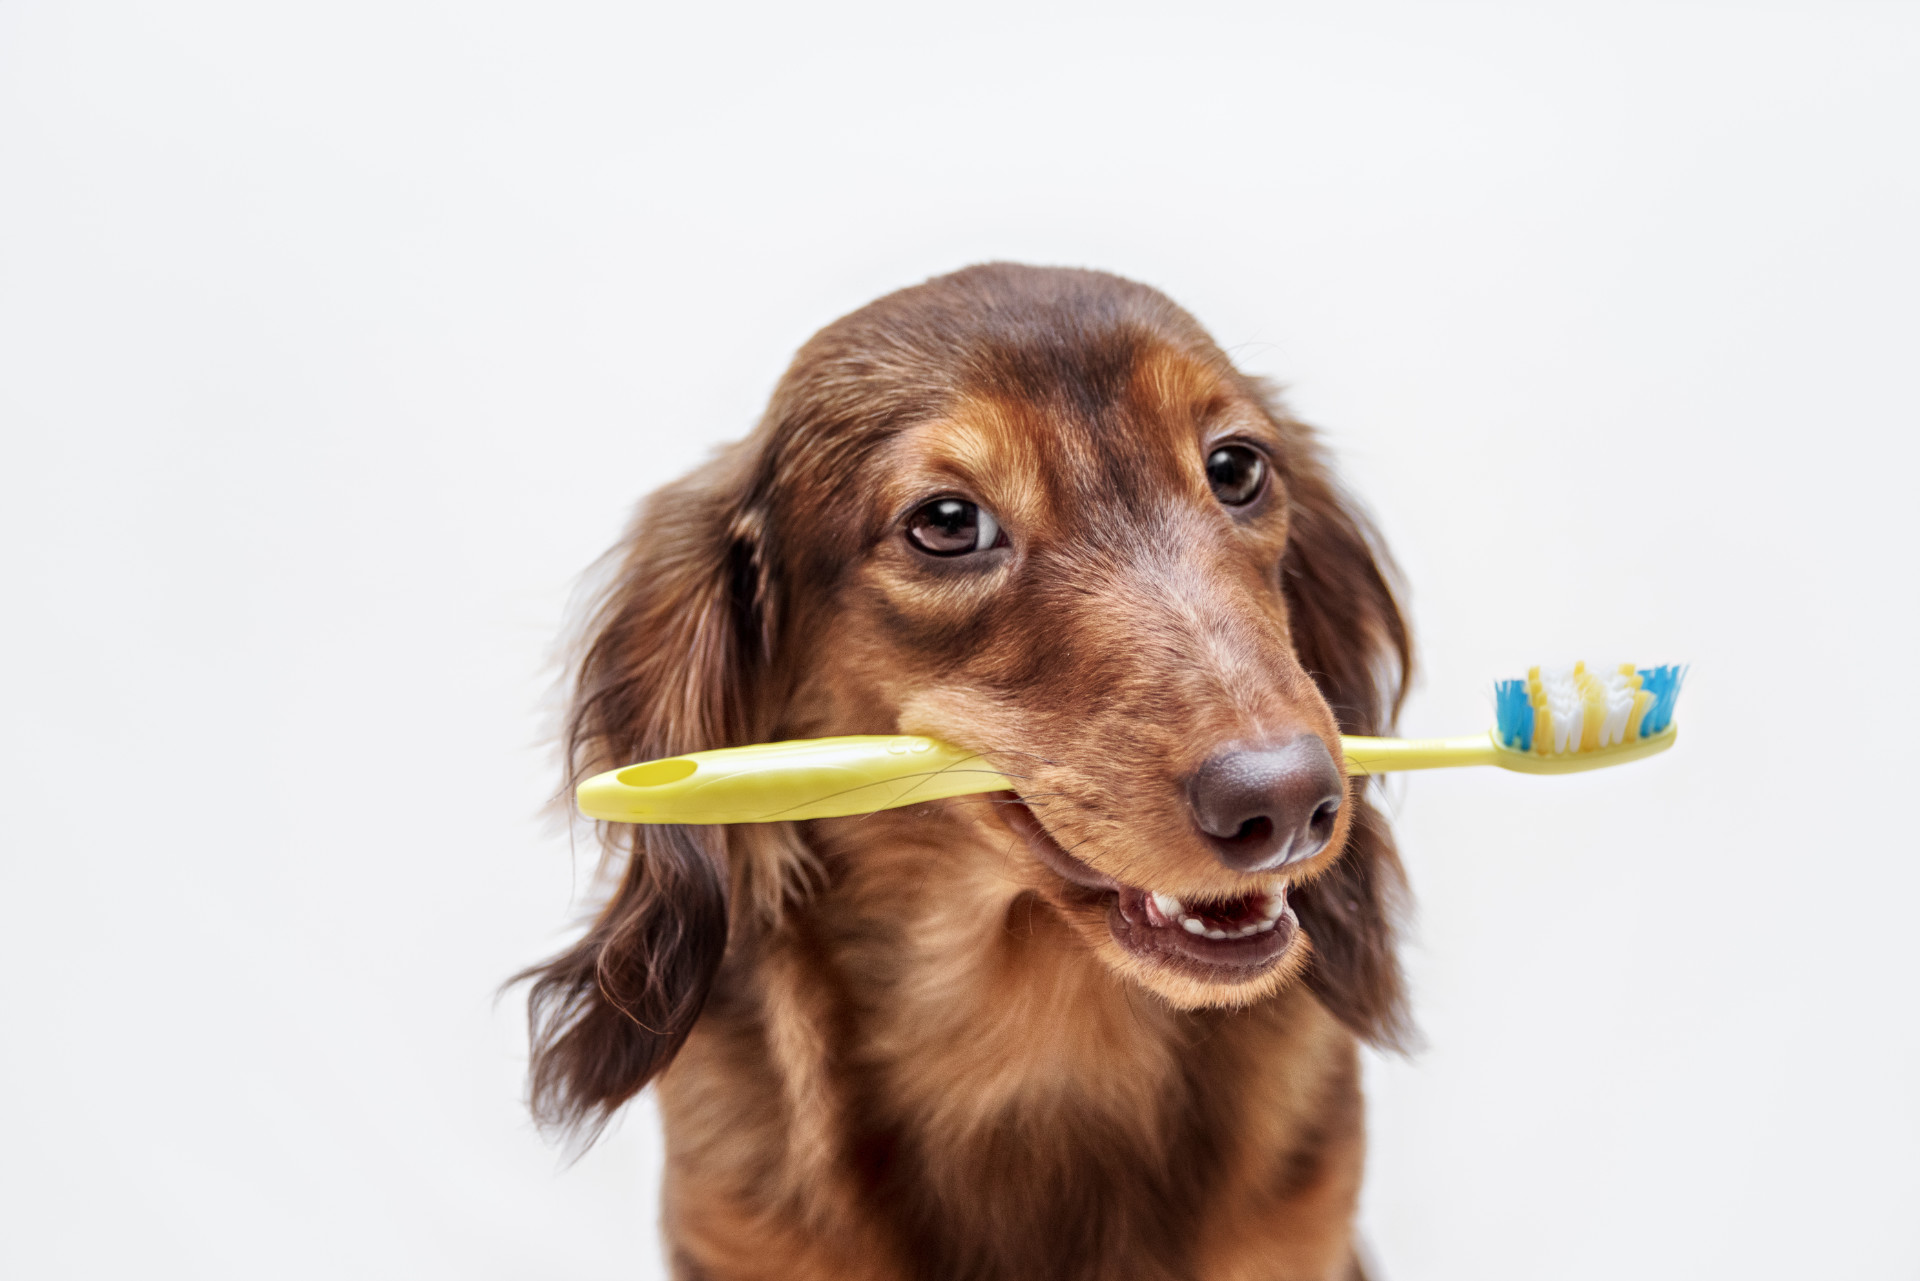 Dachshund dog with a toothbrush on a light background, not isolated